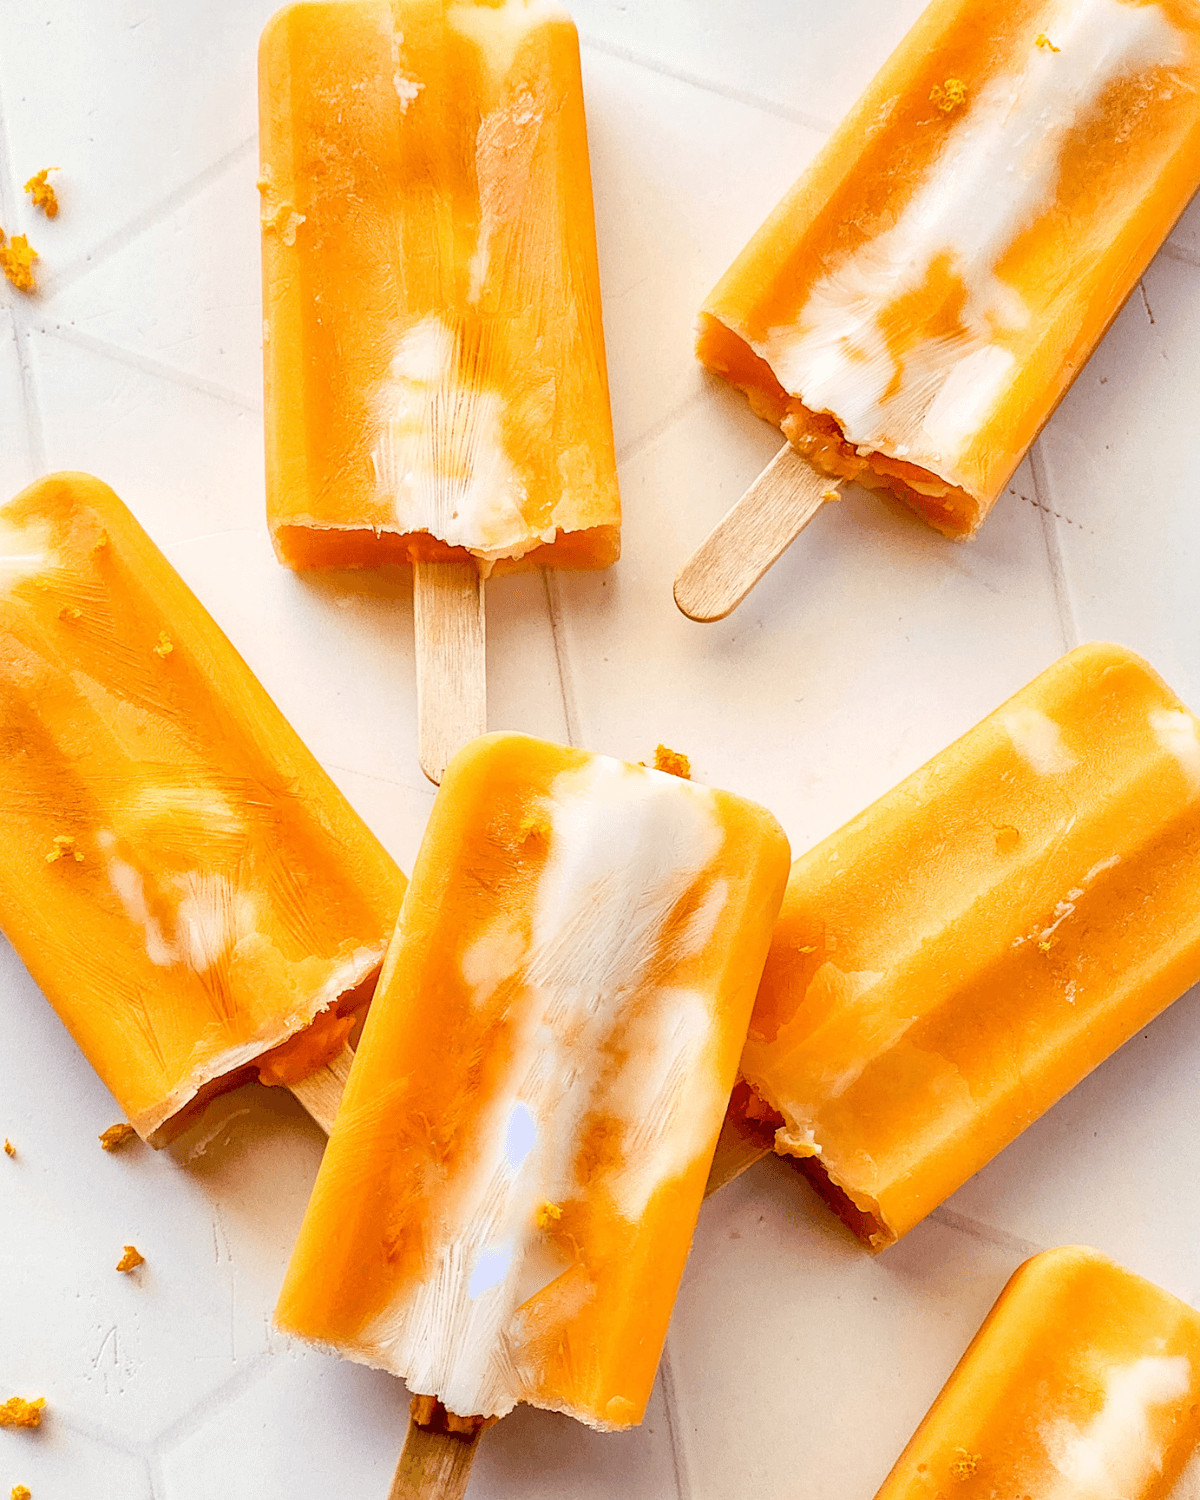 6 of the creamsicles orange popsicles.